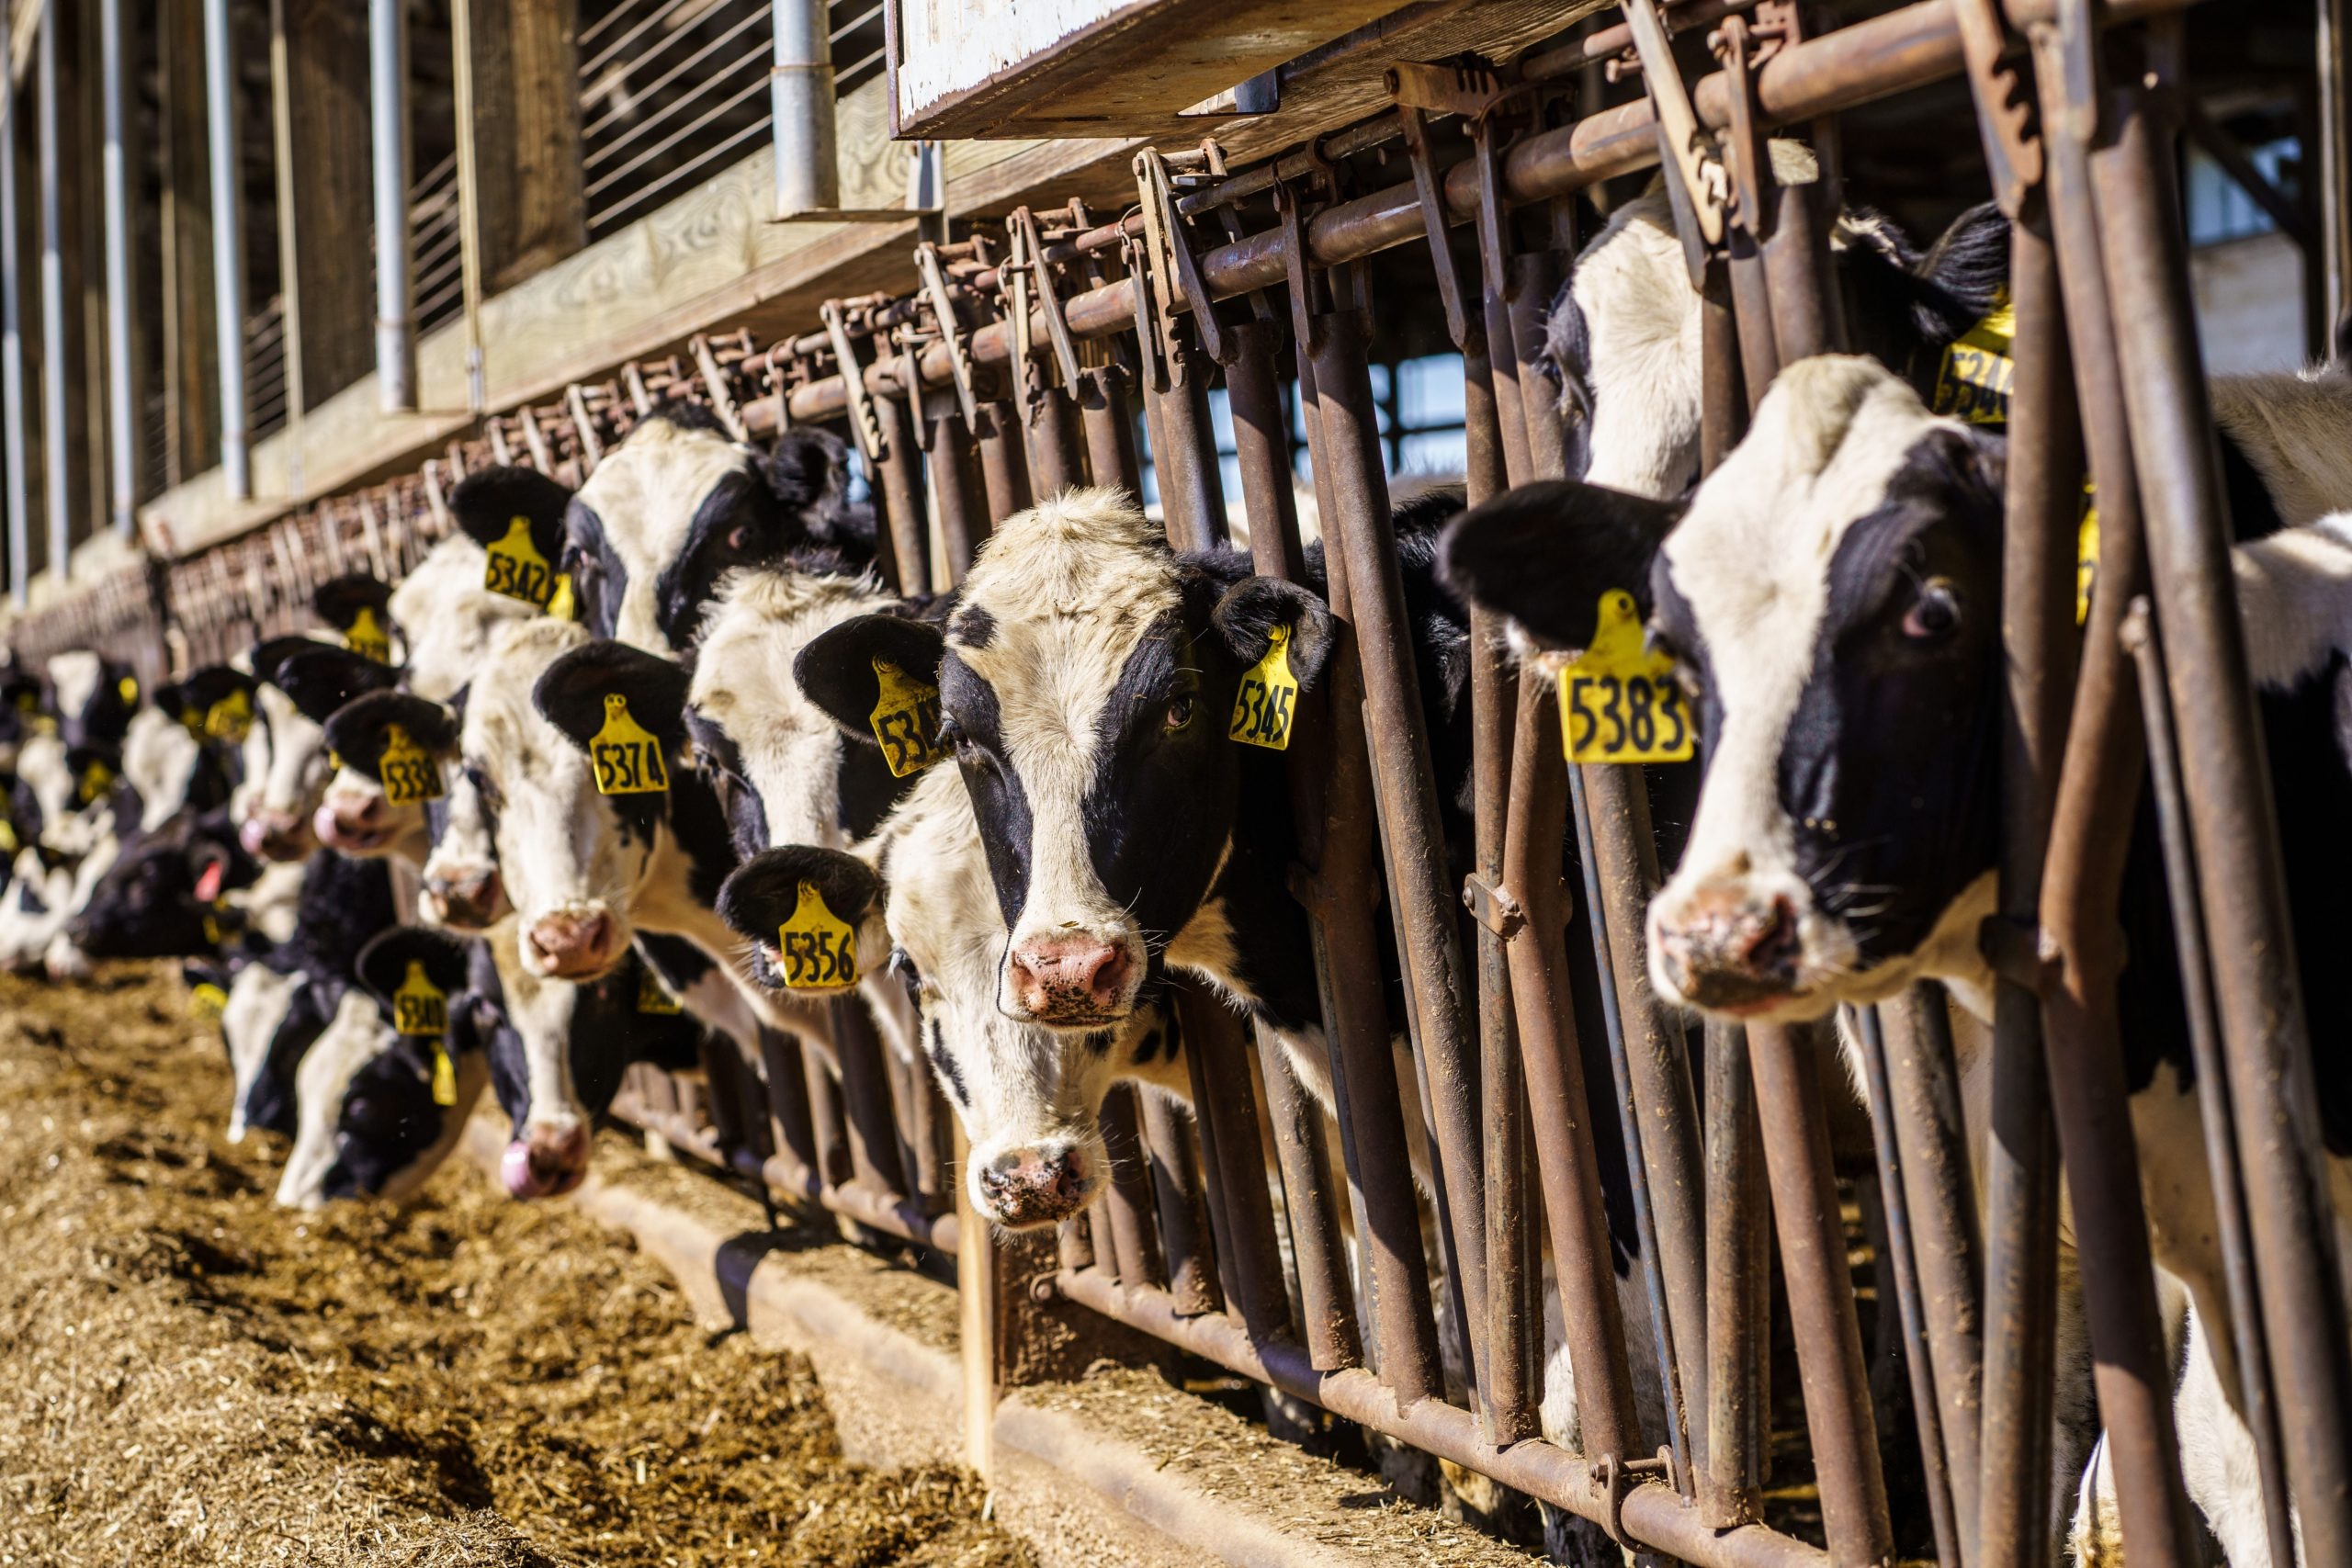 Cows at a dairy farm in Wisconsin in 2020. (Photo: KEREM YUCEL/AFP, Getty Images)